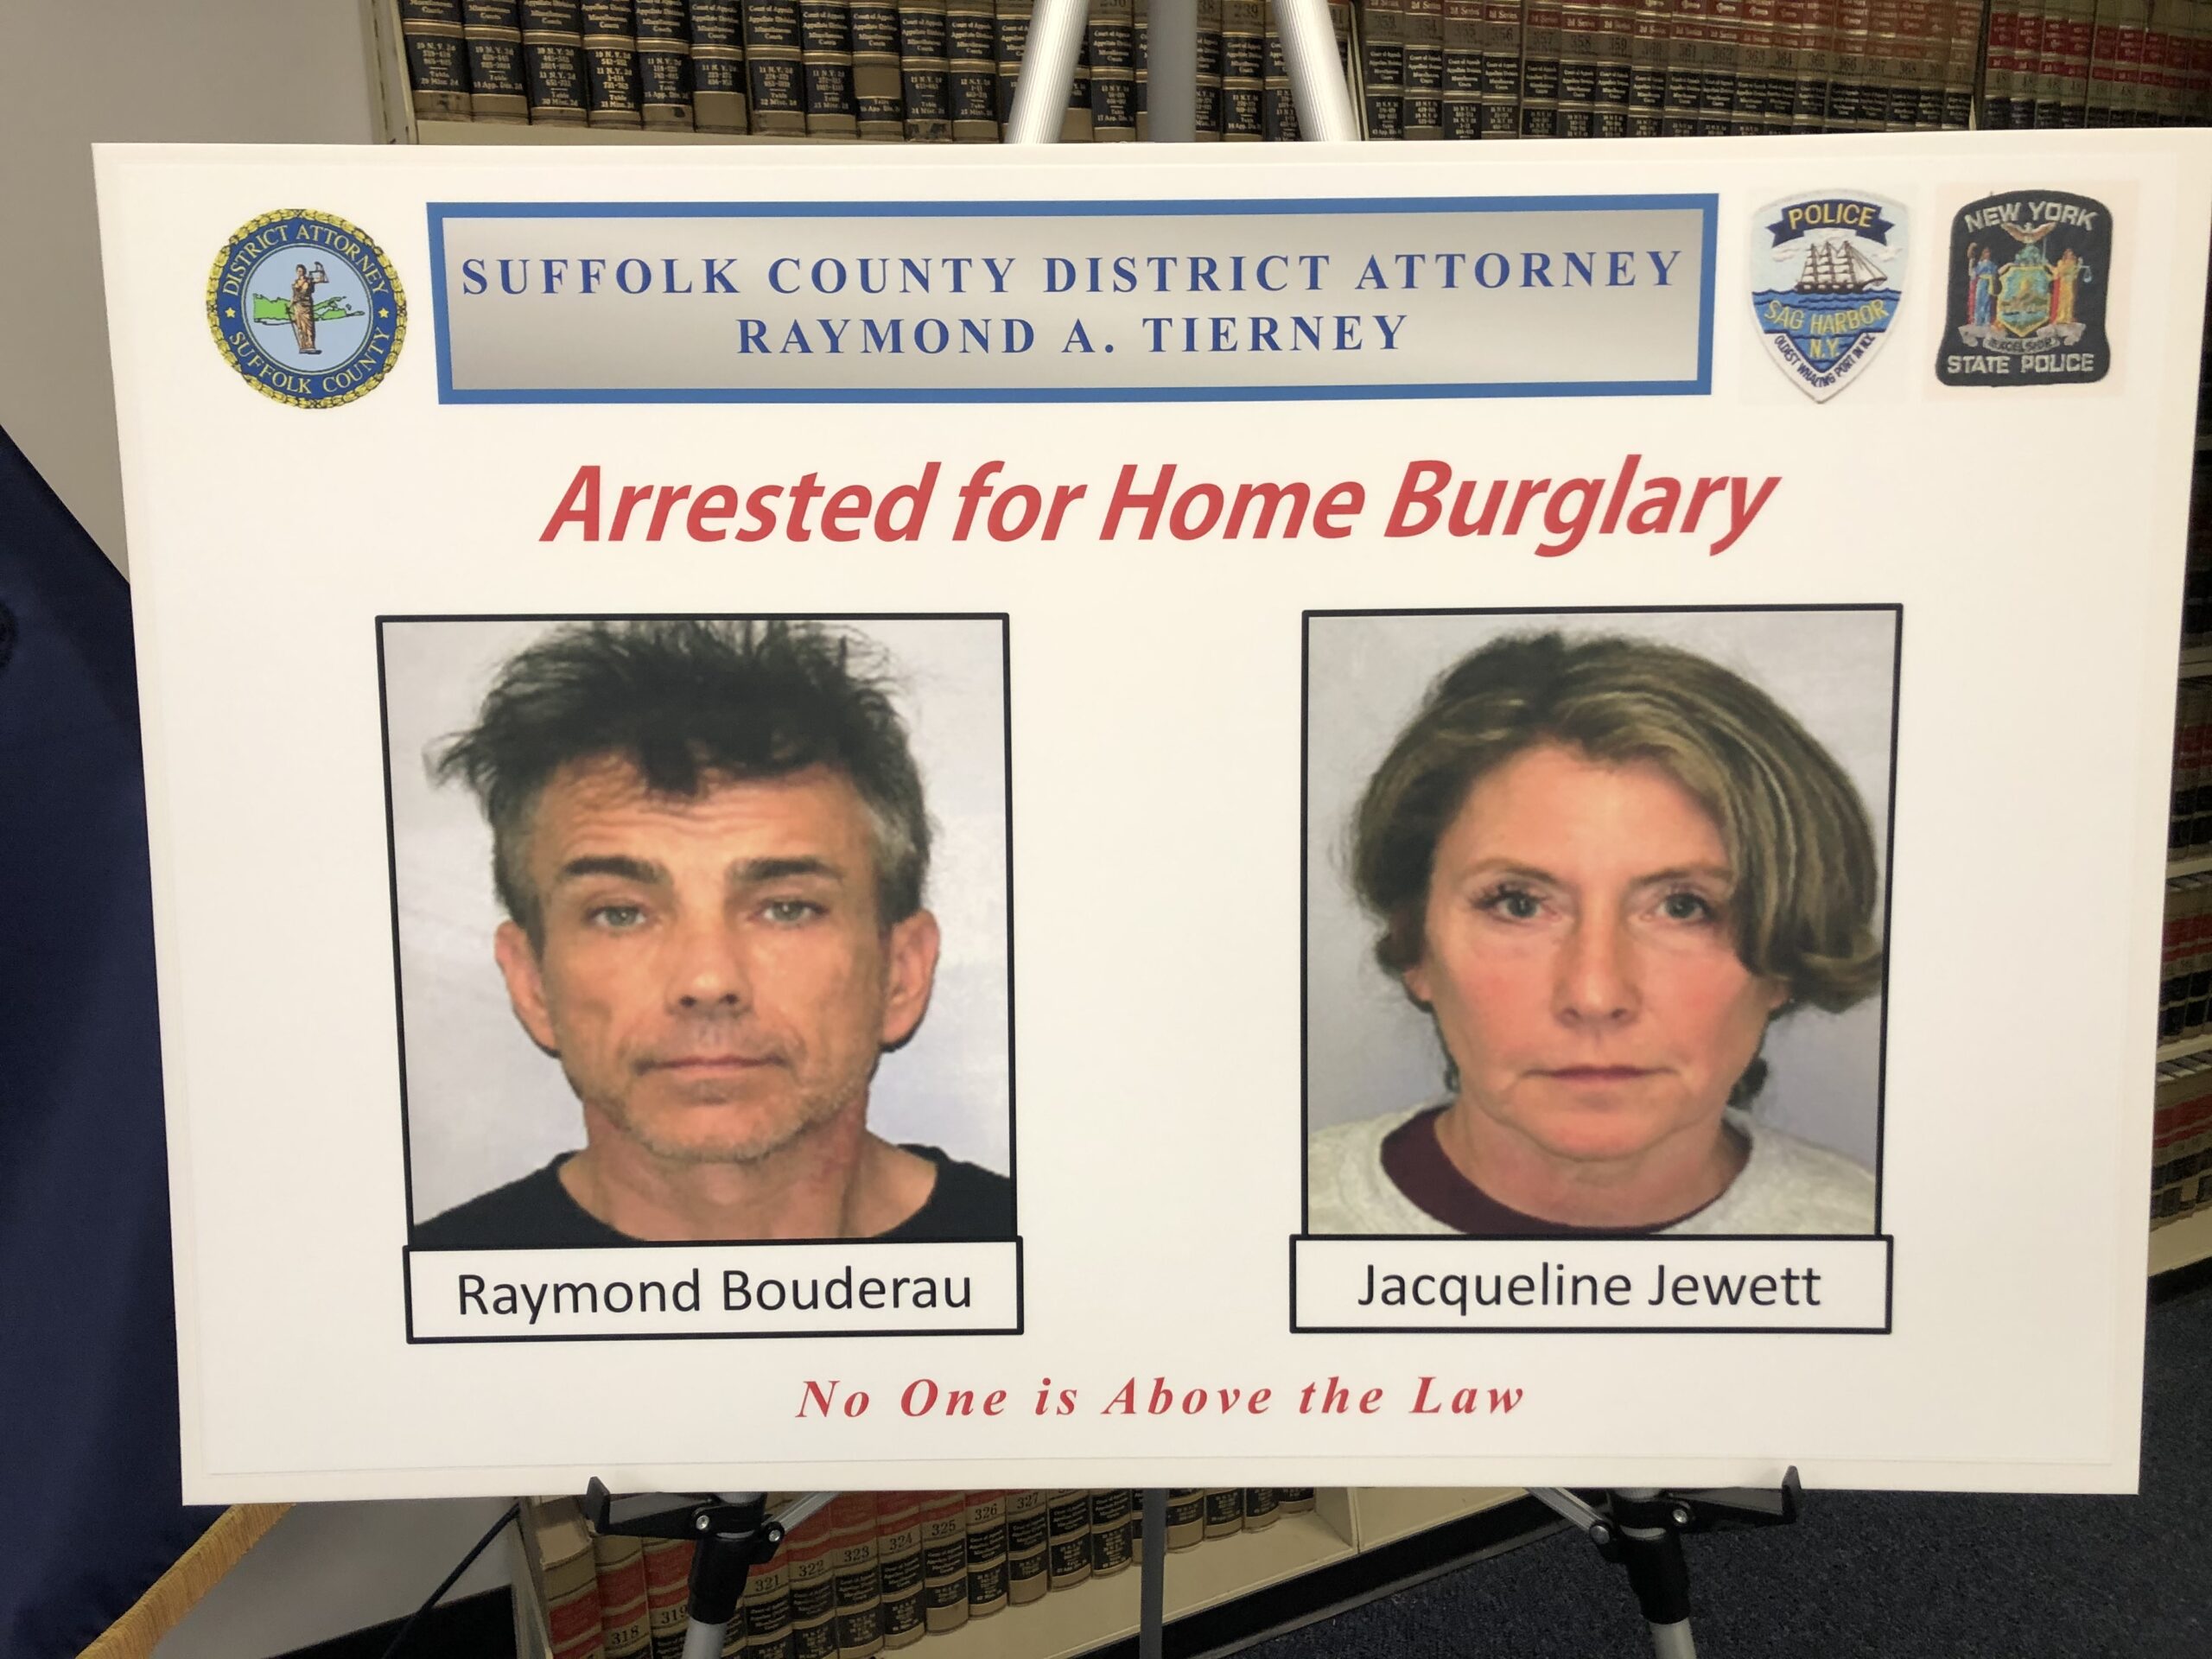 Suffolk County District Attorney Ray Tierney, along with members of the State Police and Sag Harbor Police, announced the arrest of a couple charged in two organized burglaries during a press conference at the D.A.'s office in Riverside on Tuesday. T.E. MCMORROW